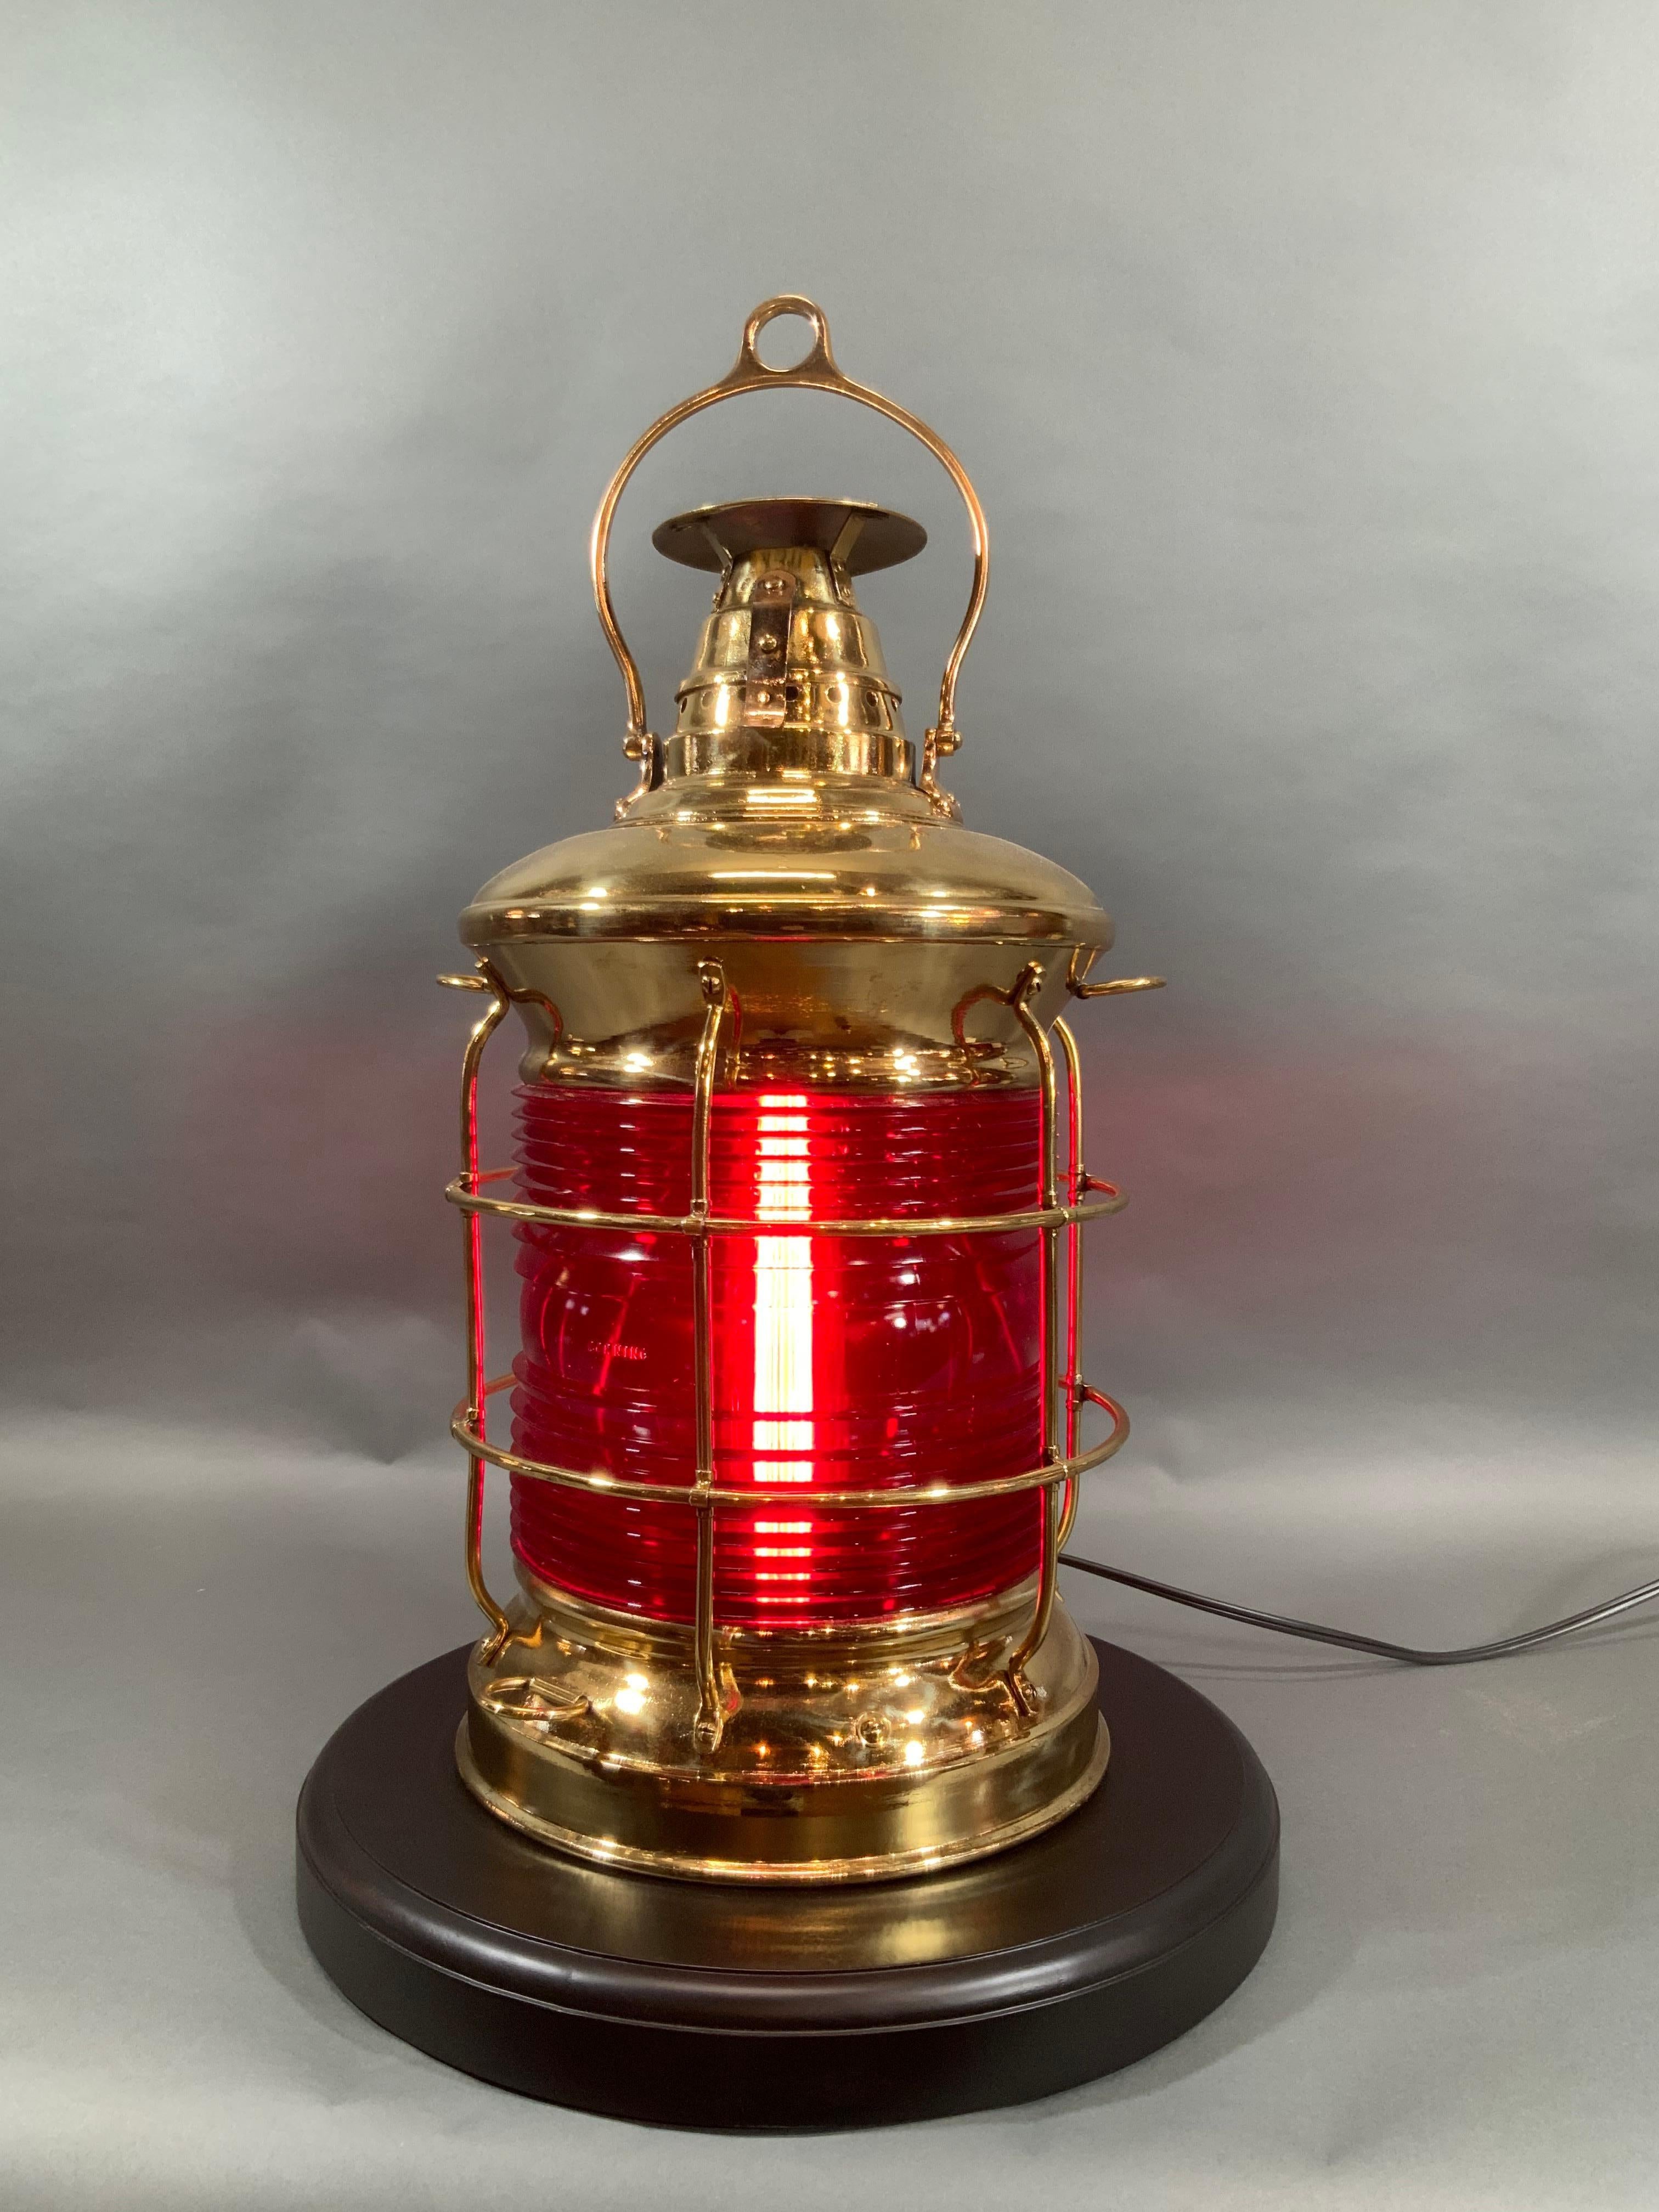 Superb ship's lantern by Lovell with a ruby red lens by Corning. Highest quality ship's lantern with a heavy hoisting handle, vented top, engraved top, thick Fresnel lens, protective bars. Meticulously polished and lacquered to a gleaming finish.